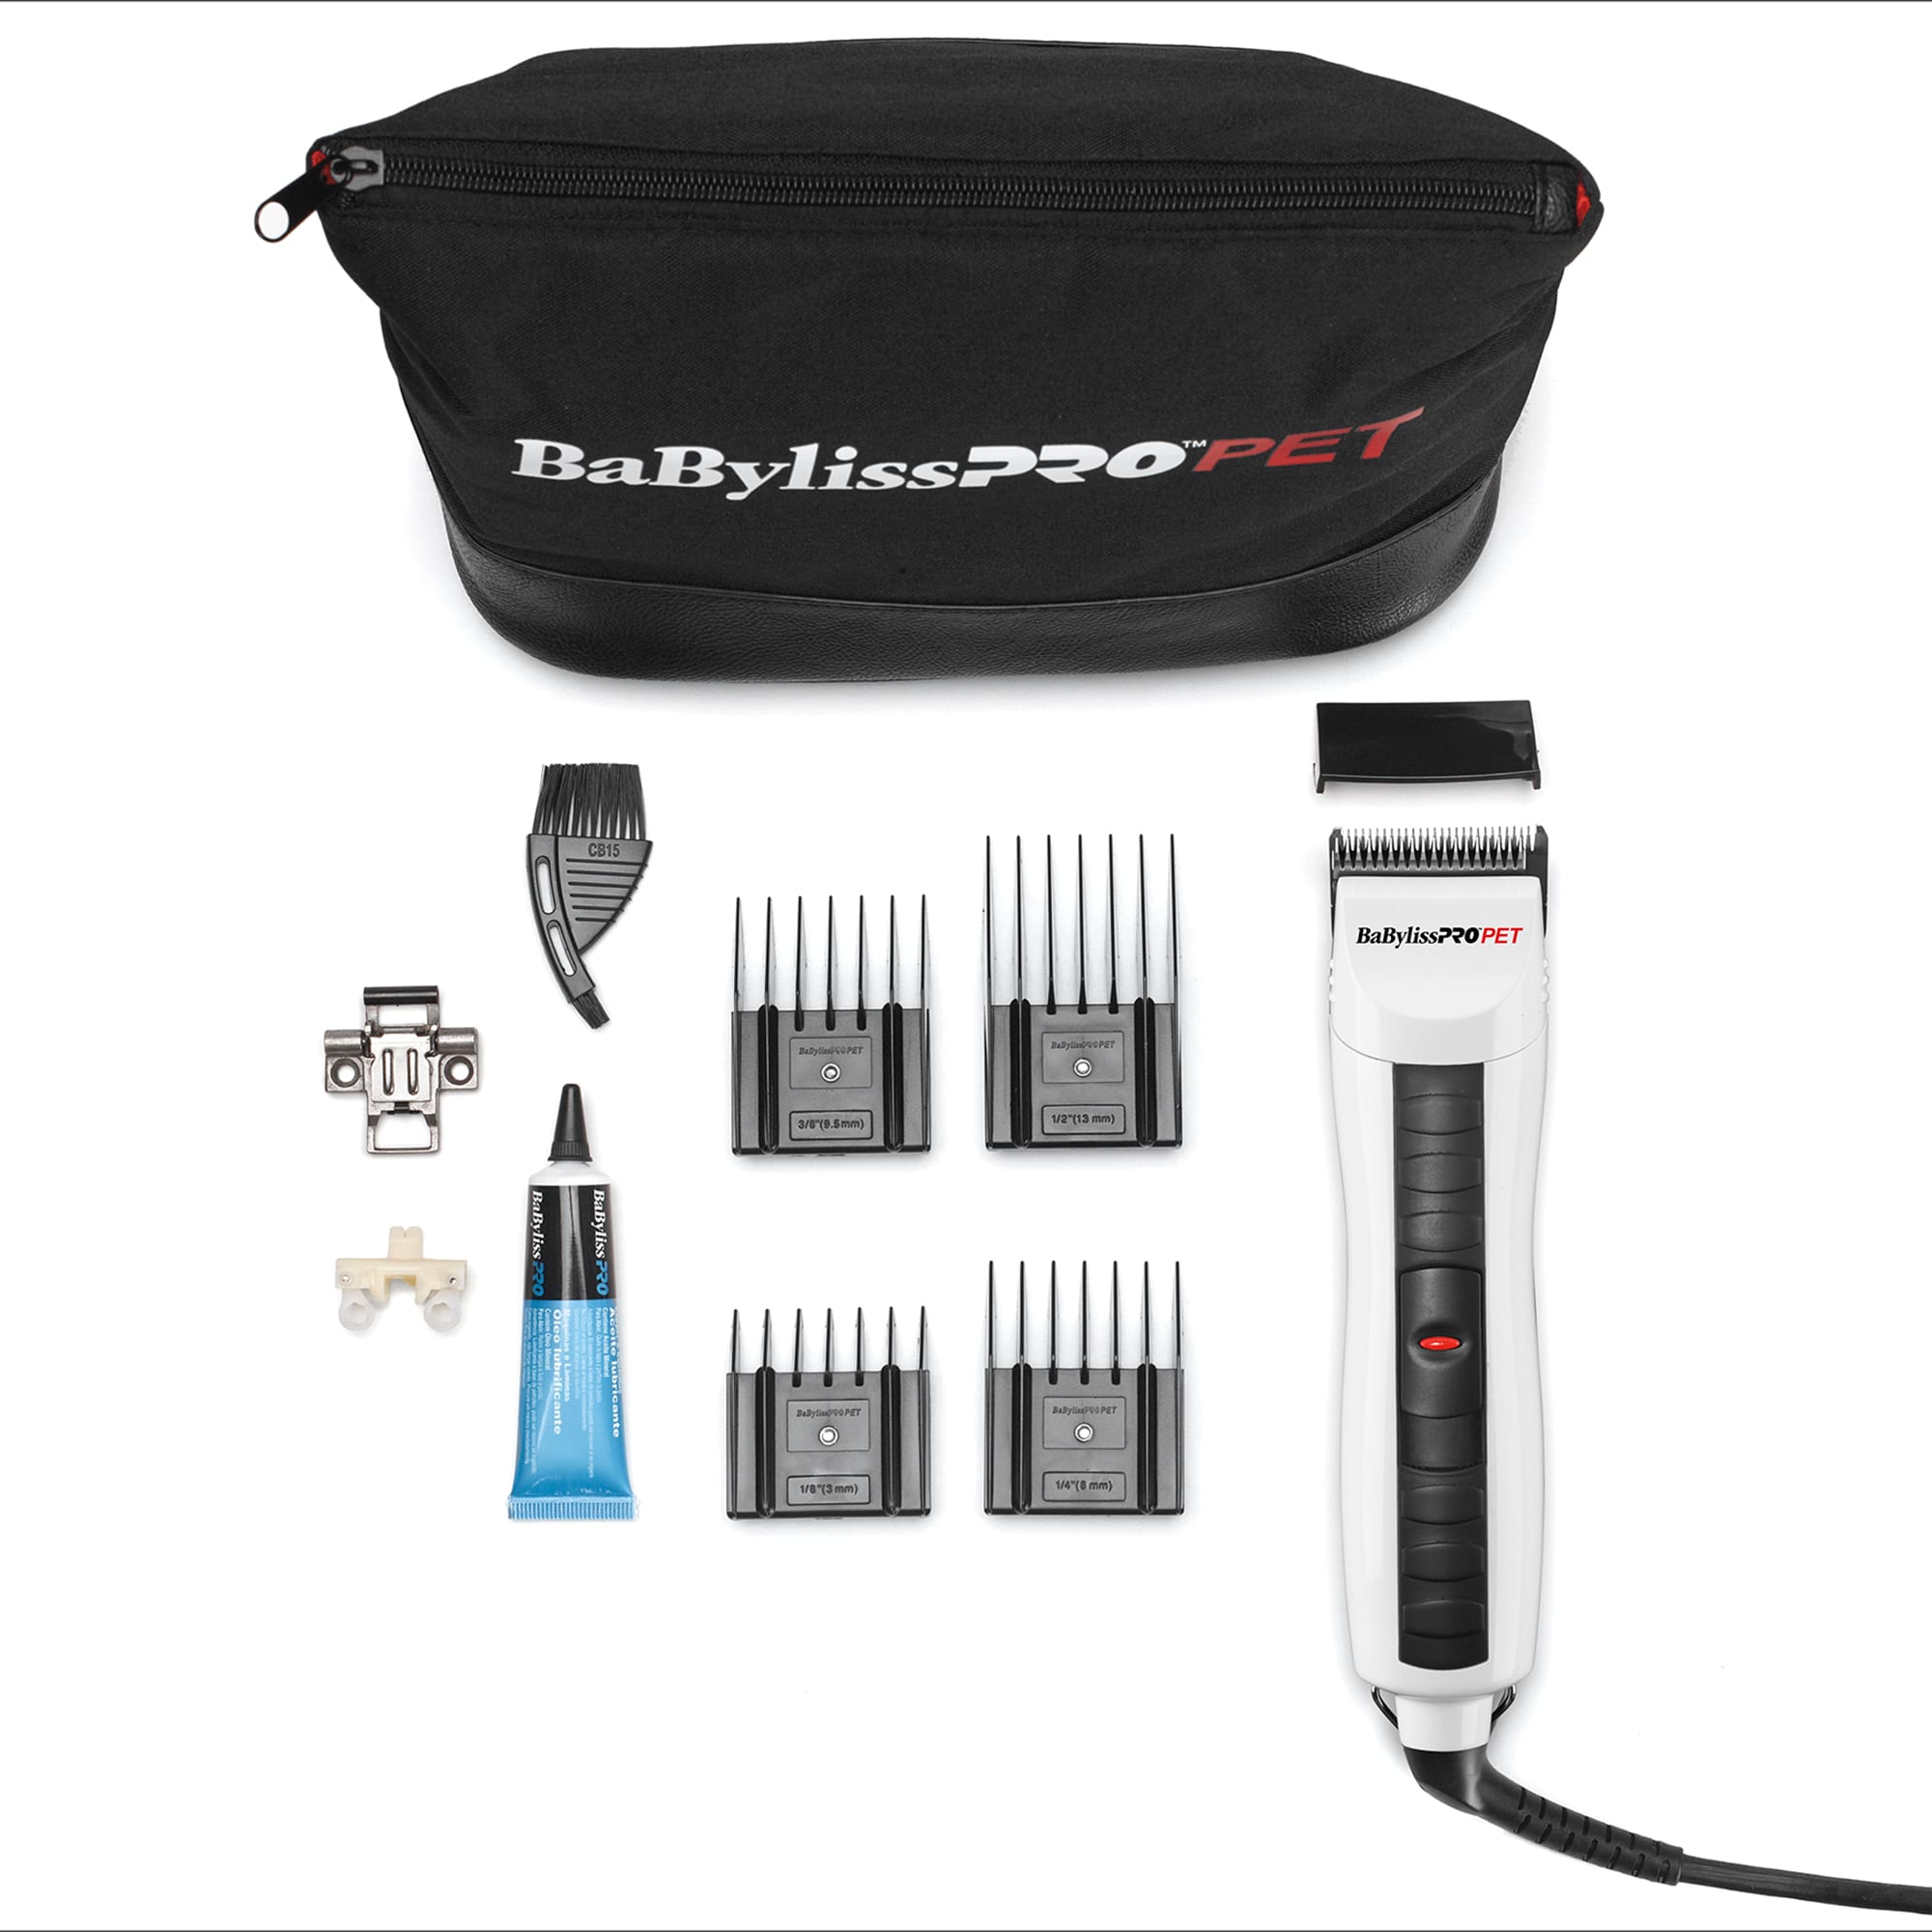 BaByliss PRO PET Two-Speed Professional Brushless Motor Clipper